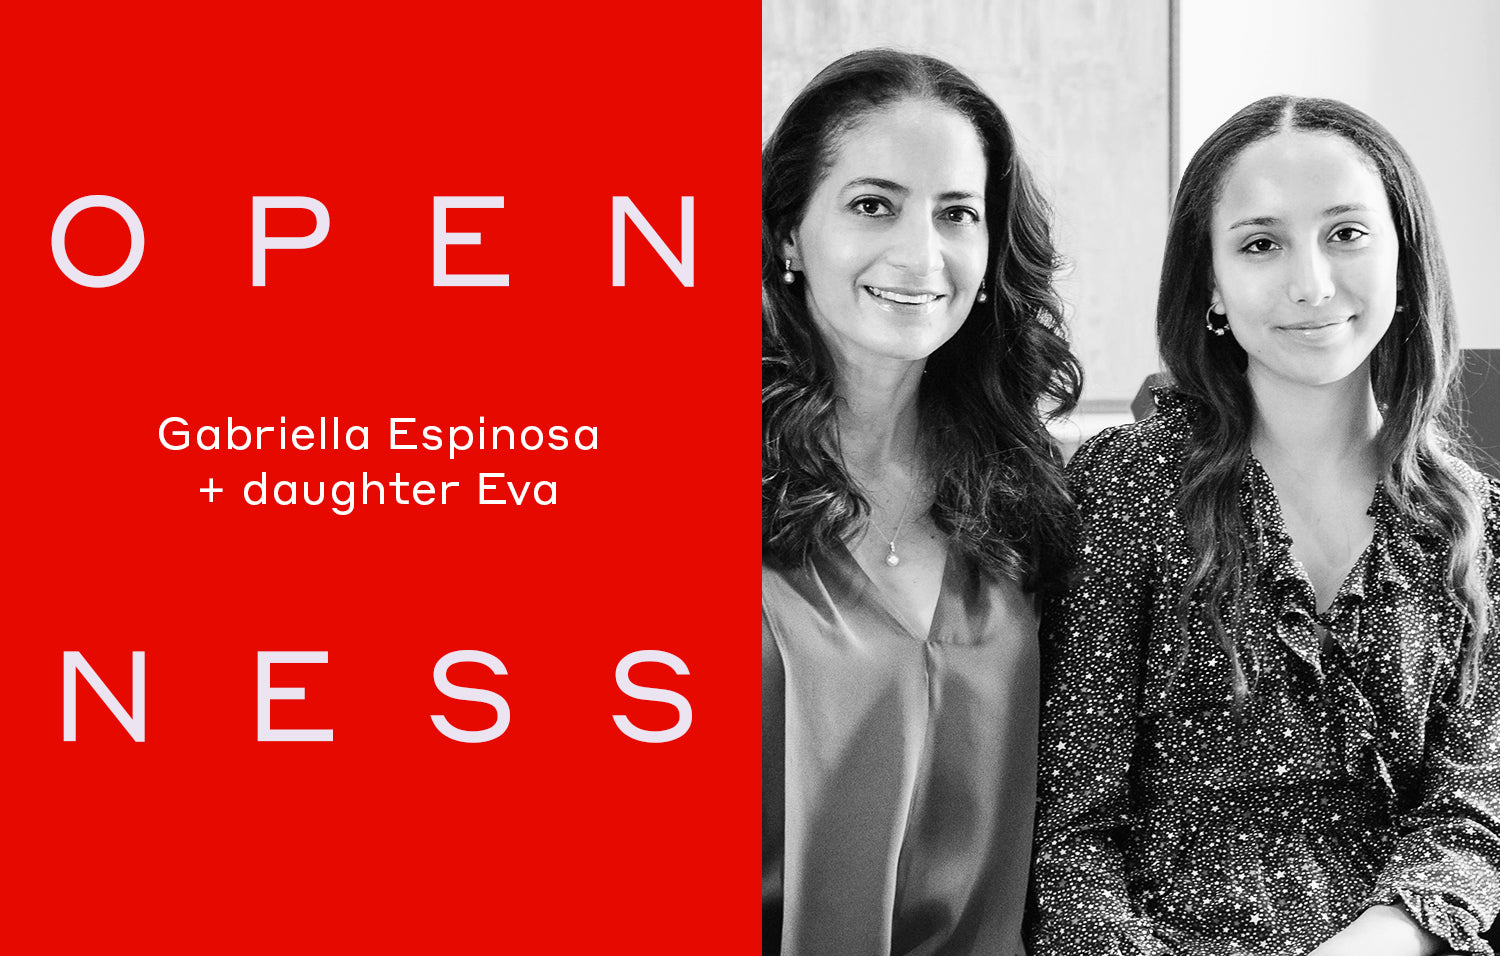 Gabriella Espinosa on Open Conversations between women for Womaness